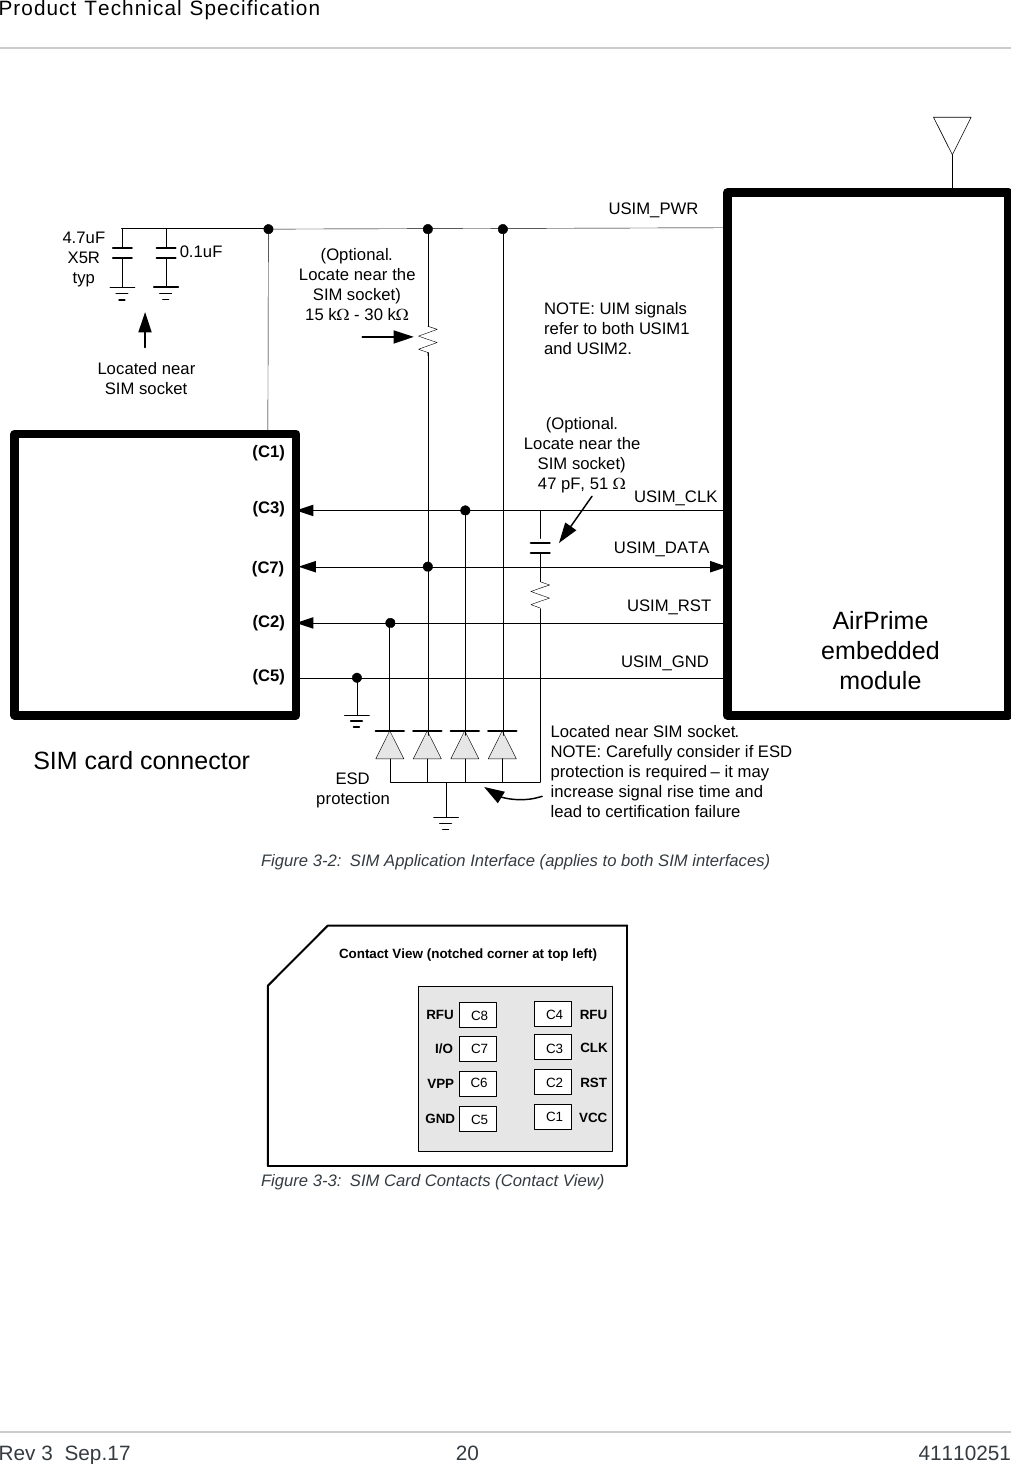 Product Technical SpecificationRev 3  Sep.17 20 41110251Figure 3-2: SIM Application Interface (applies to both SIM interfaces)Figure 3-3: SIM Card Contacts (Contact View)AirPrime embedded moduleSIM card connector(Optional. Locate near the SIM socket)47 pF, 51 4.7uFX5Rtyp(C1)USIM_PWRUSIM_CLKUSIM_DATAUSIM_RSTLocated near SIM socketLocated near SIM socket.NOTE: Carefully consider if ESD protection is required – it may increase signal rise time and lead to certification failureUSIM_GNDESD protection(C3)(C7)(C2)(C5)(Optional. Locate near the SIM socket)15 k - 30 k0.1uFNOTE: UIM signals refer to both USIM1 and USIM2.C8C7C6C5C4C3C2C1GND VCCVPP RSTI/O CLKRFU RFUContact View (notched corner at top left)